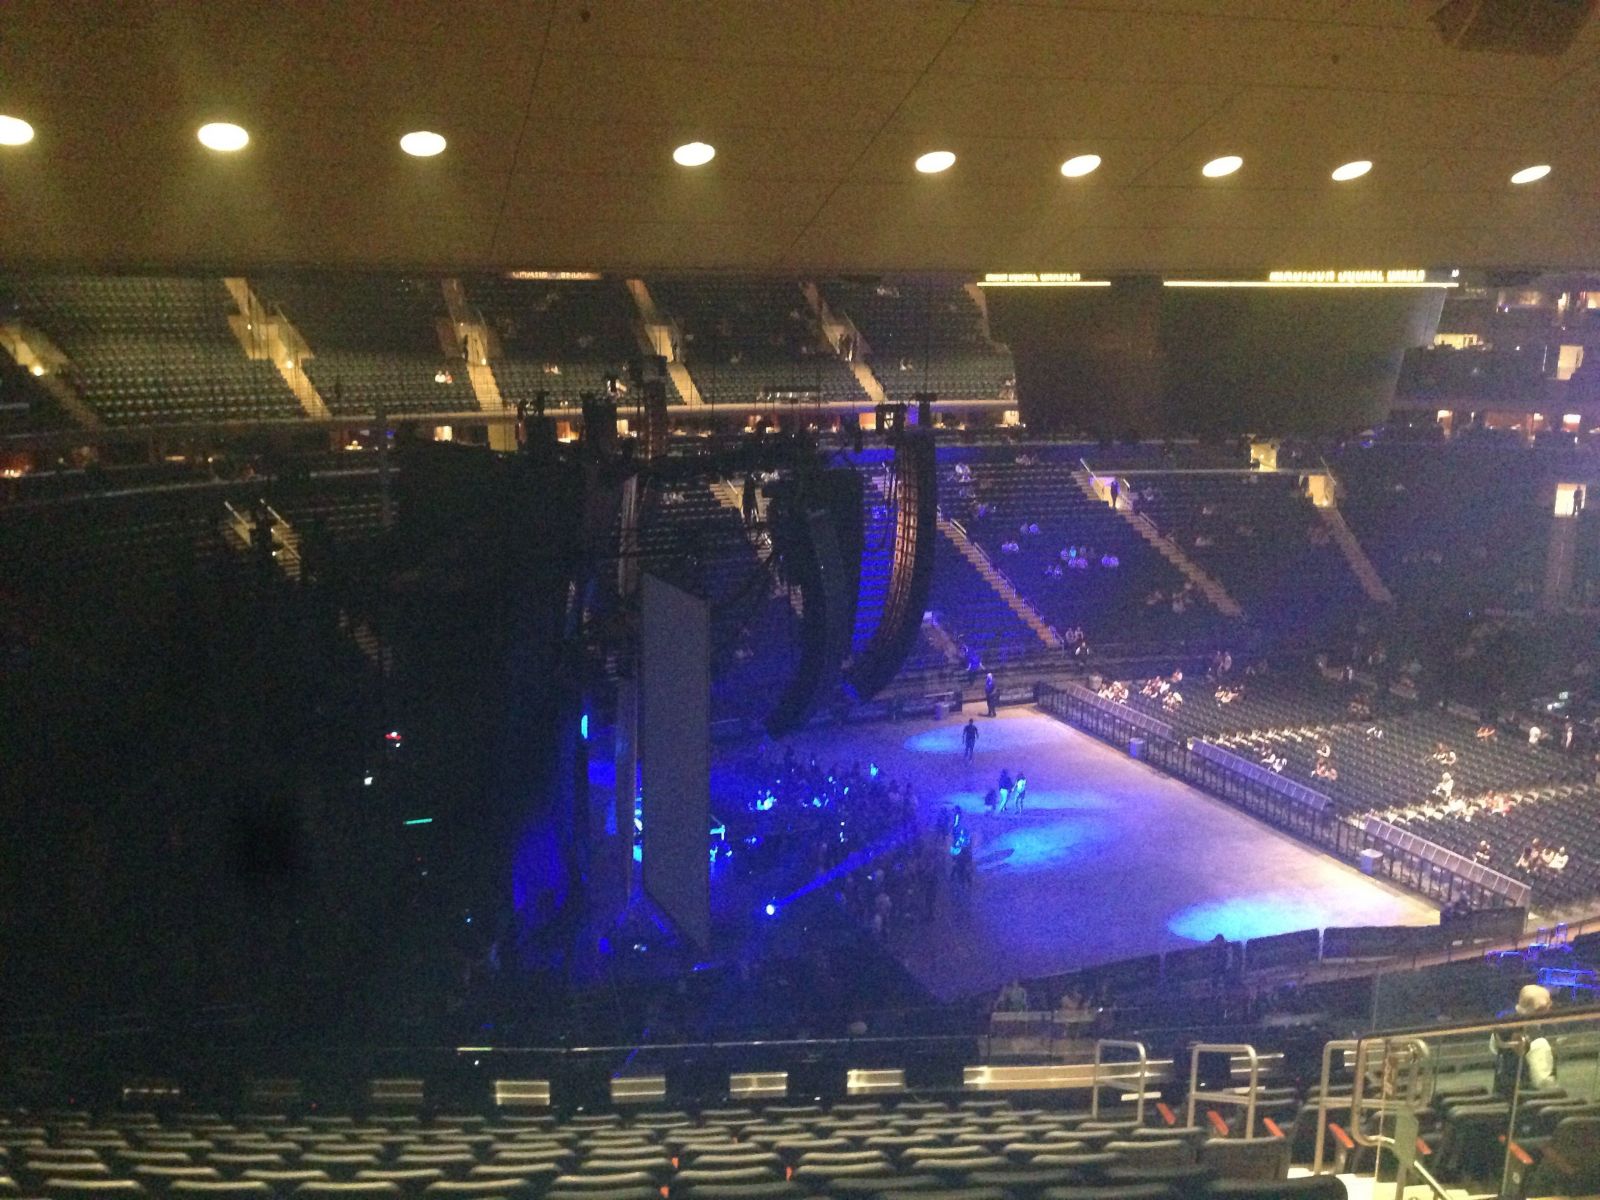 section 221, row 14 seat view  for concert - madison square garden